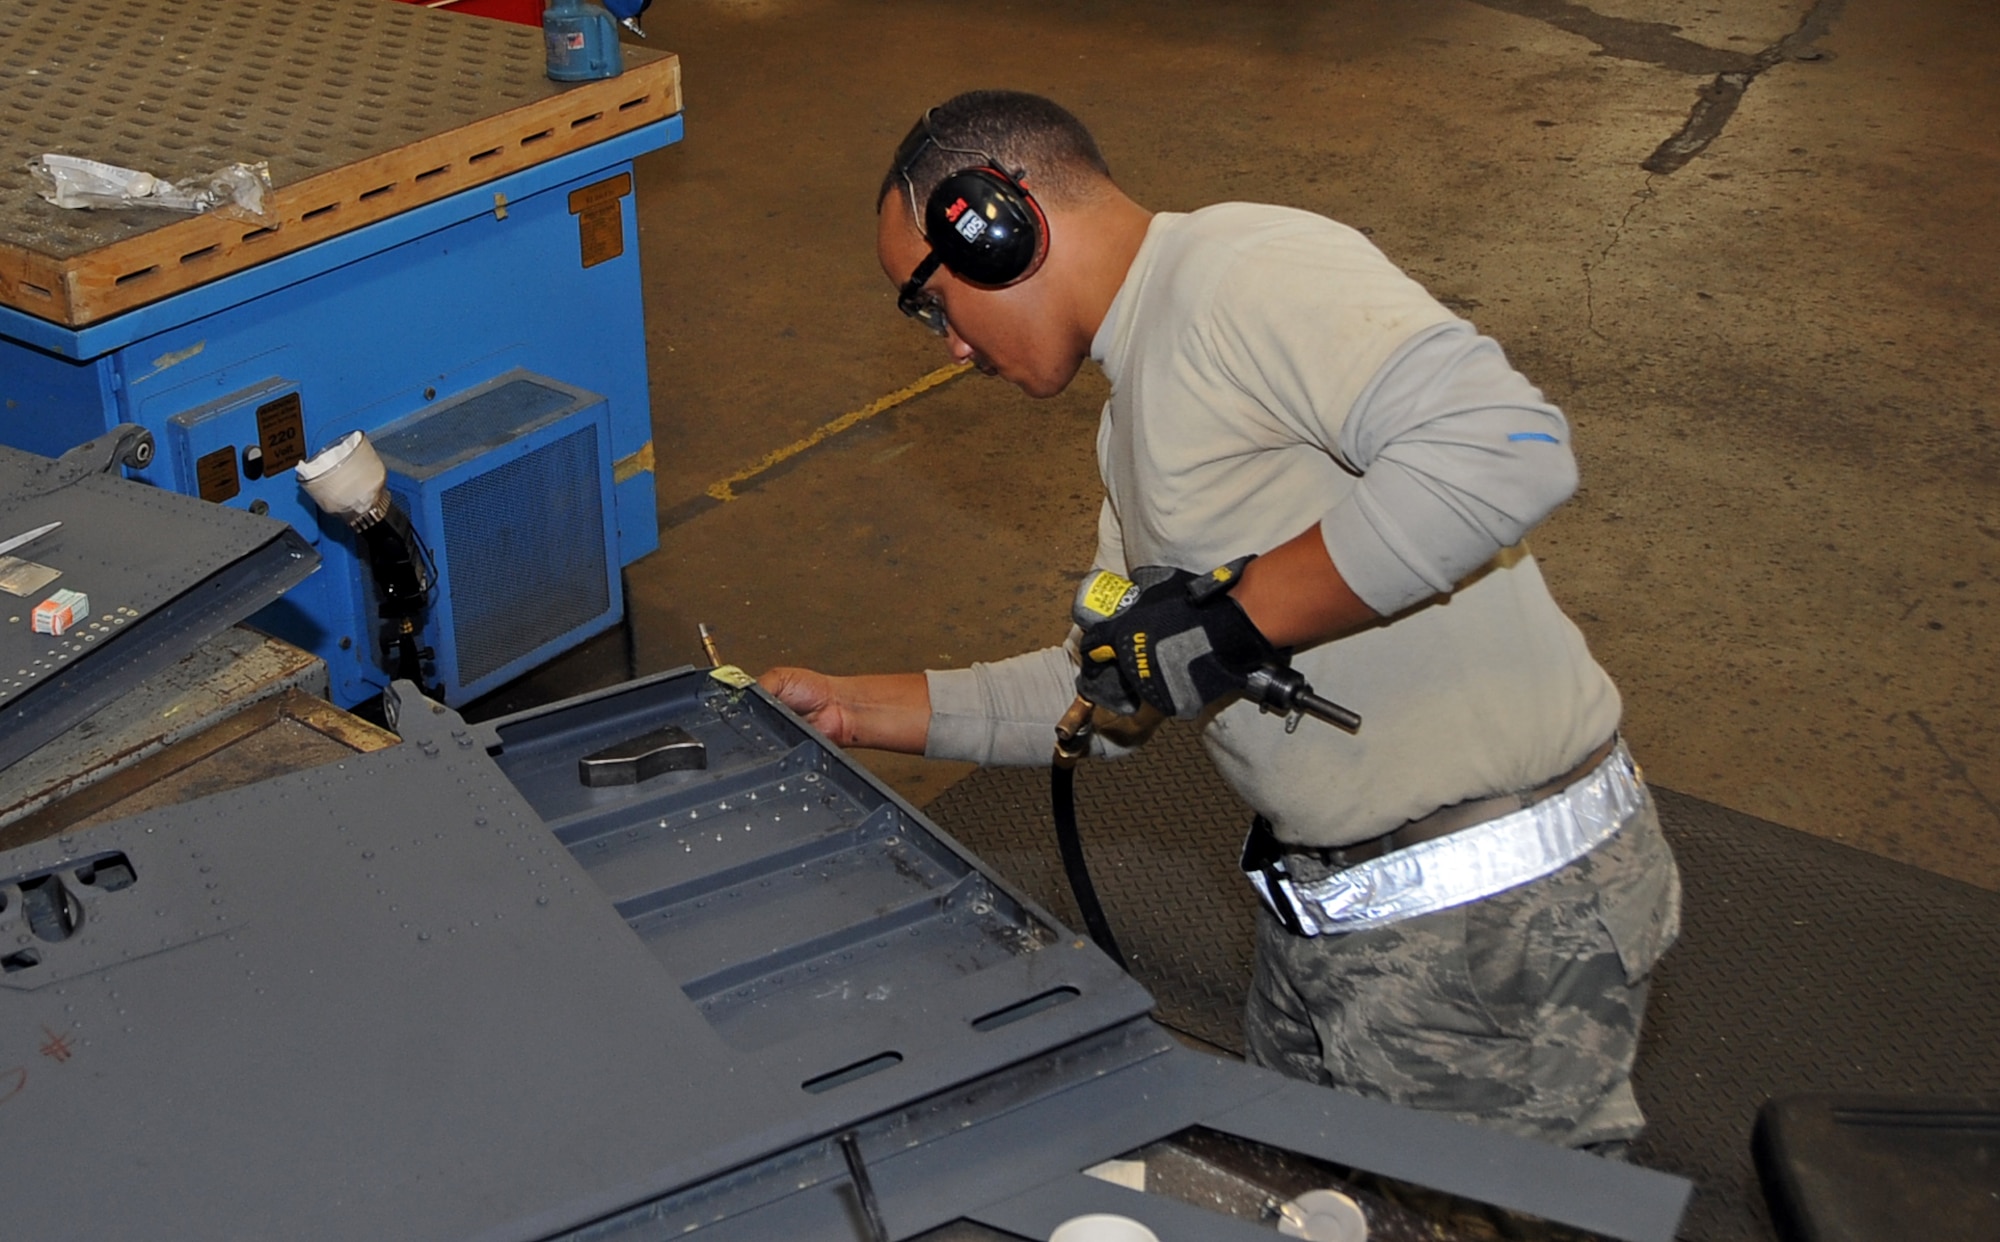 Staff Sgt. Montez Lee, 2nd Maintenance Squadron aircraft structural maintenance craftsman, reviews his work on a B-52H Stratofortress spoiler at Barksdale Air Force Base, La., Nov. 13, 2014. Airmen from the 2nd MXS aircraft structural maintenance shop repair or replace sheet metal and fix loose rivets and cracks on the B-52. (U.S. Air Force photo/Staff Sgt. Jason McCasland)